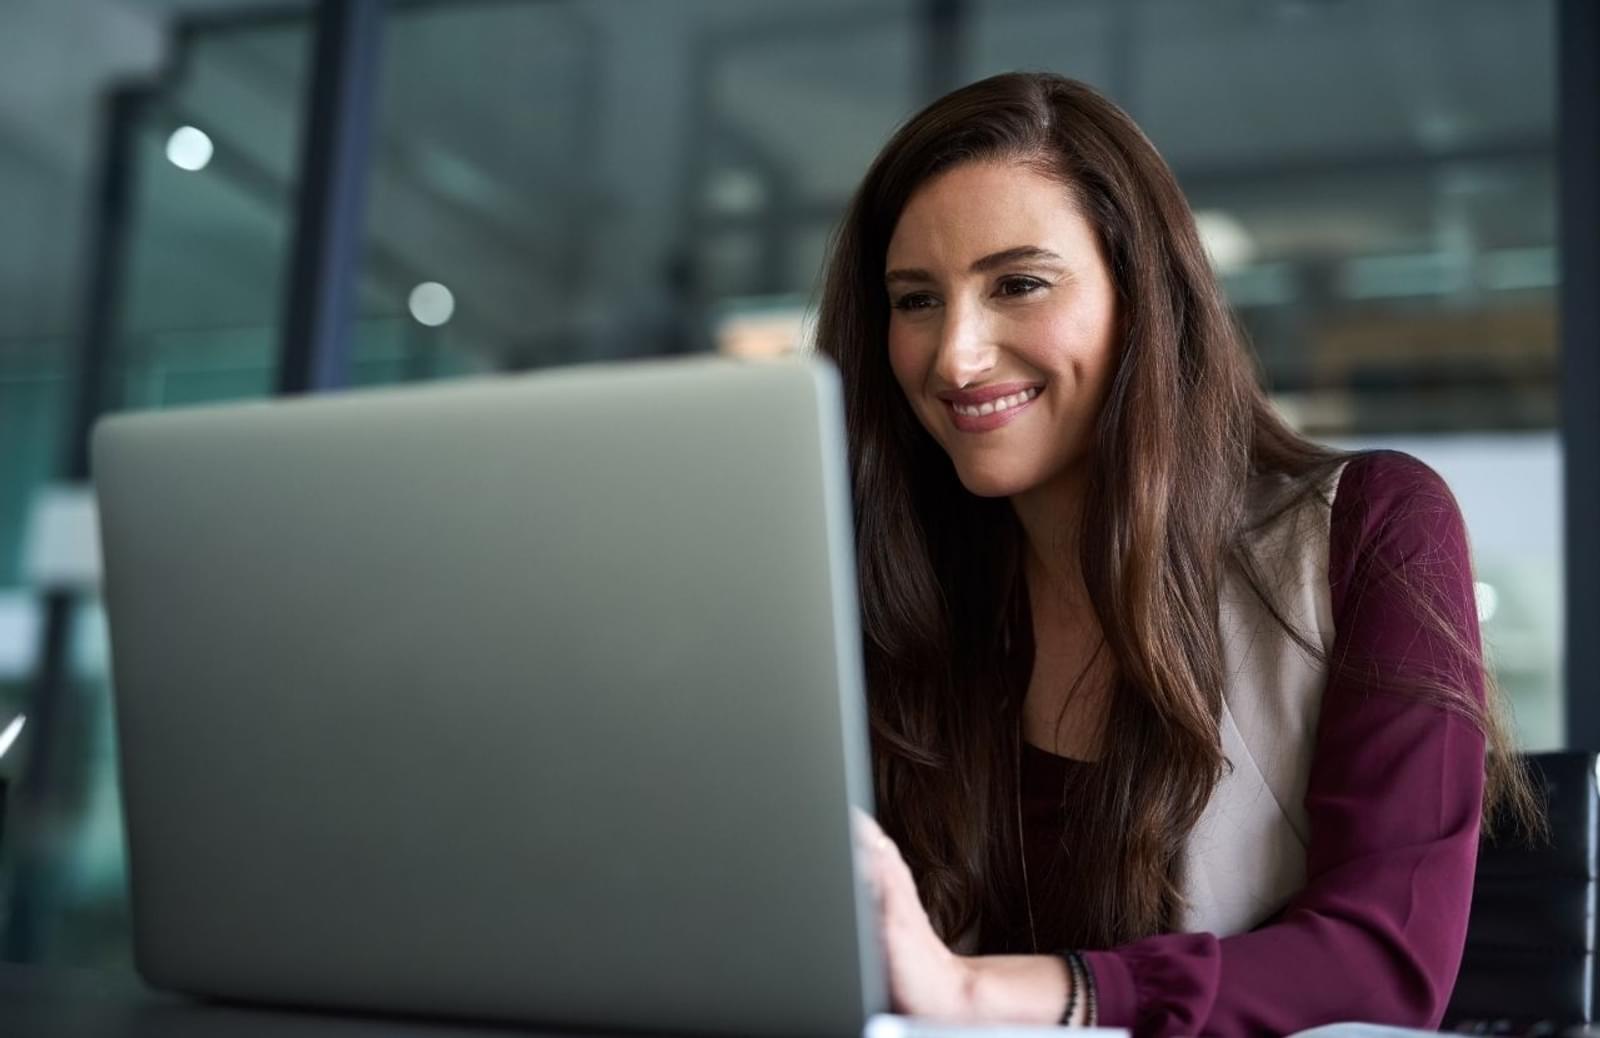 Woman smiling as she looks at laptop computer screen